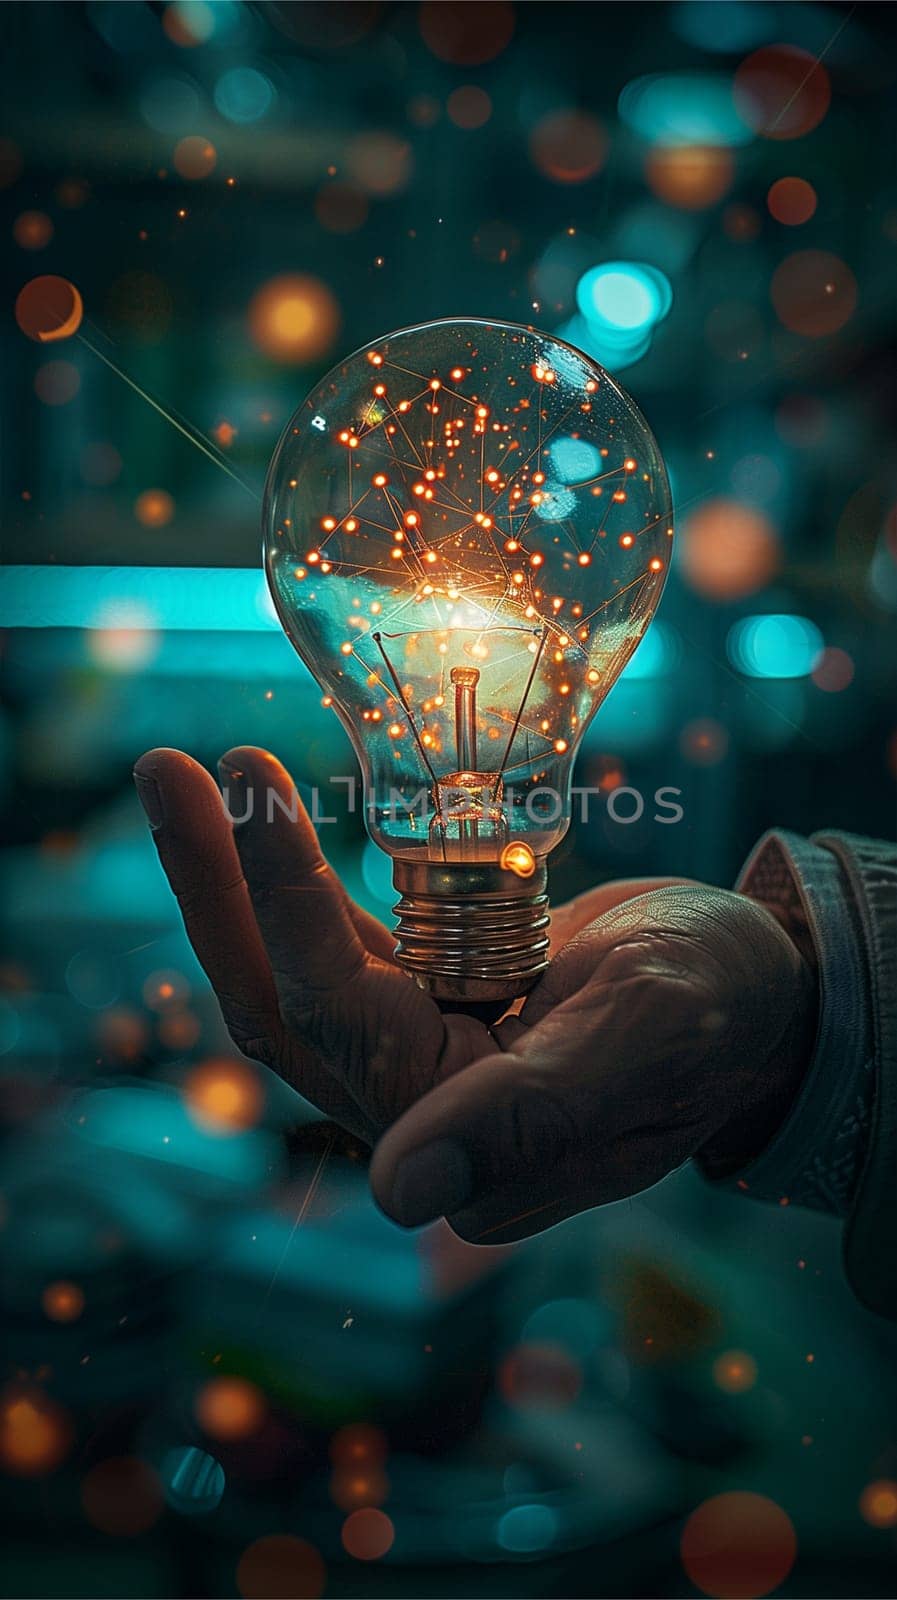 Hand Holding a Glowing Light Bulb Against a Bokeh Background by Sd28DimoN_1976